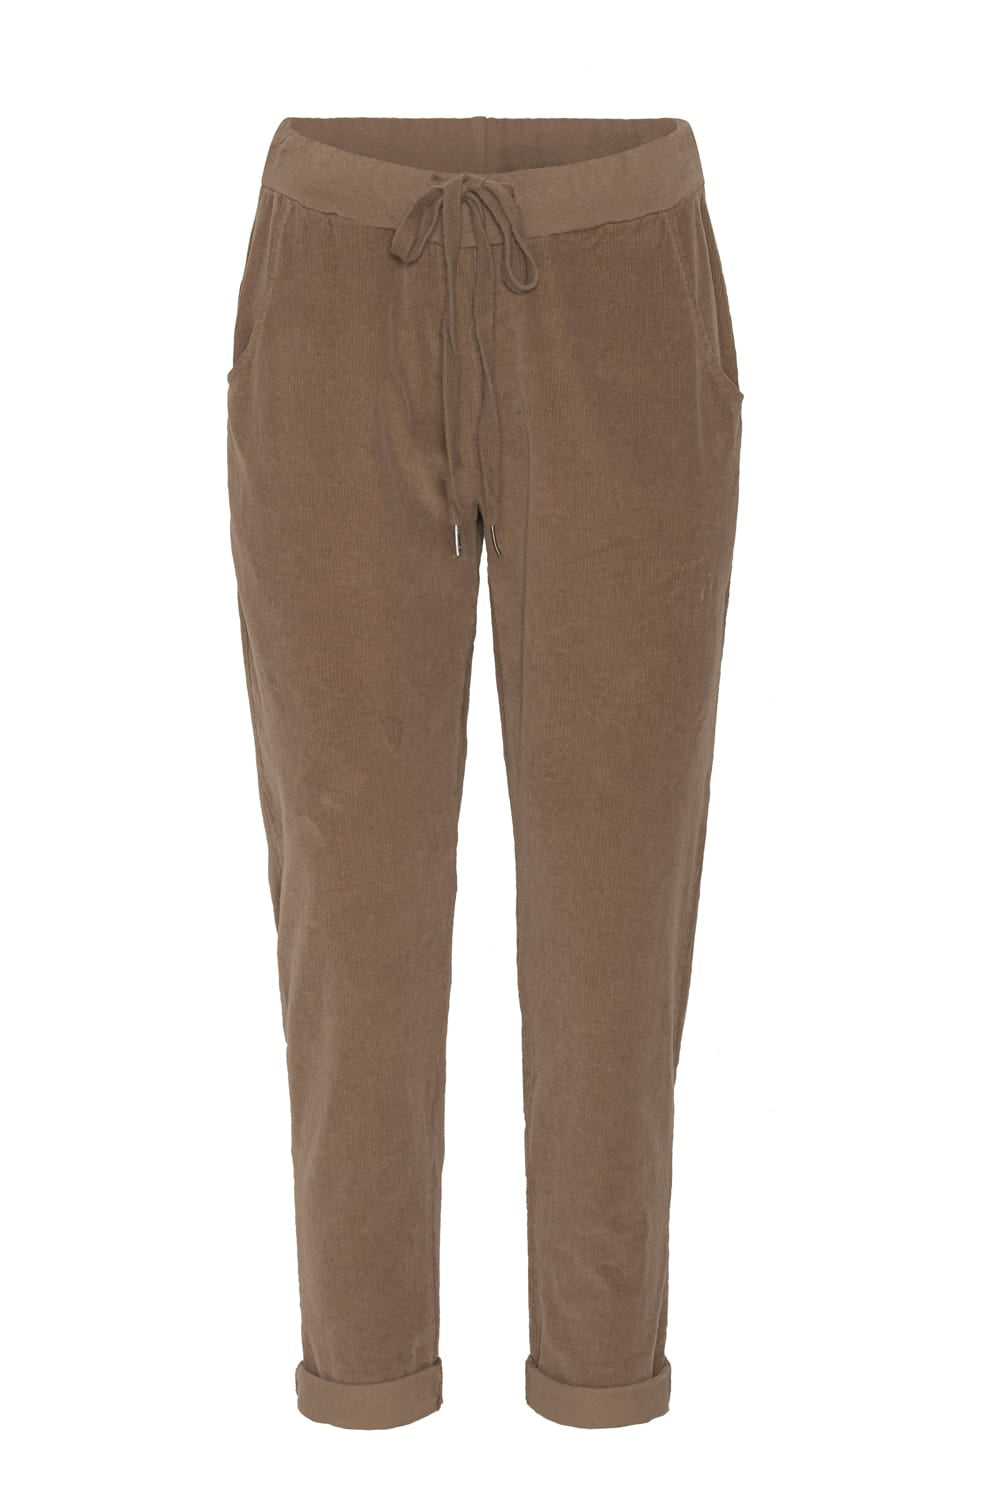 Record pants, taupe